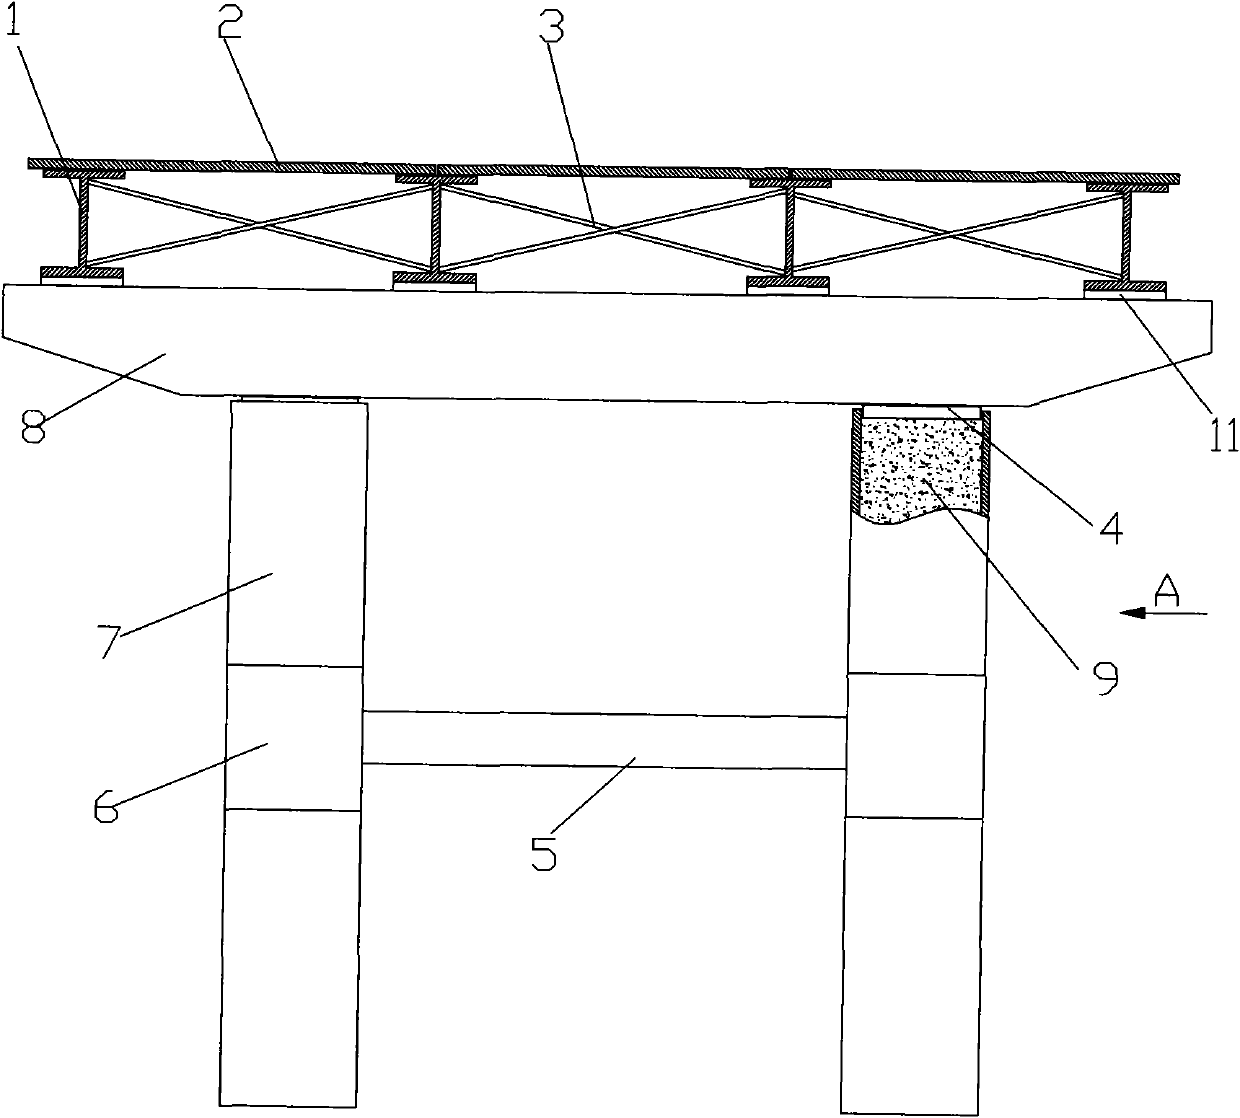 Ready-package emergency bridge and construction method for changing same into permanent bridge